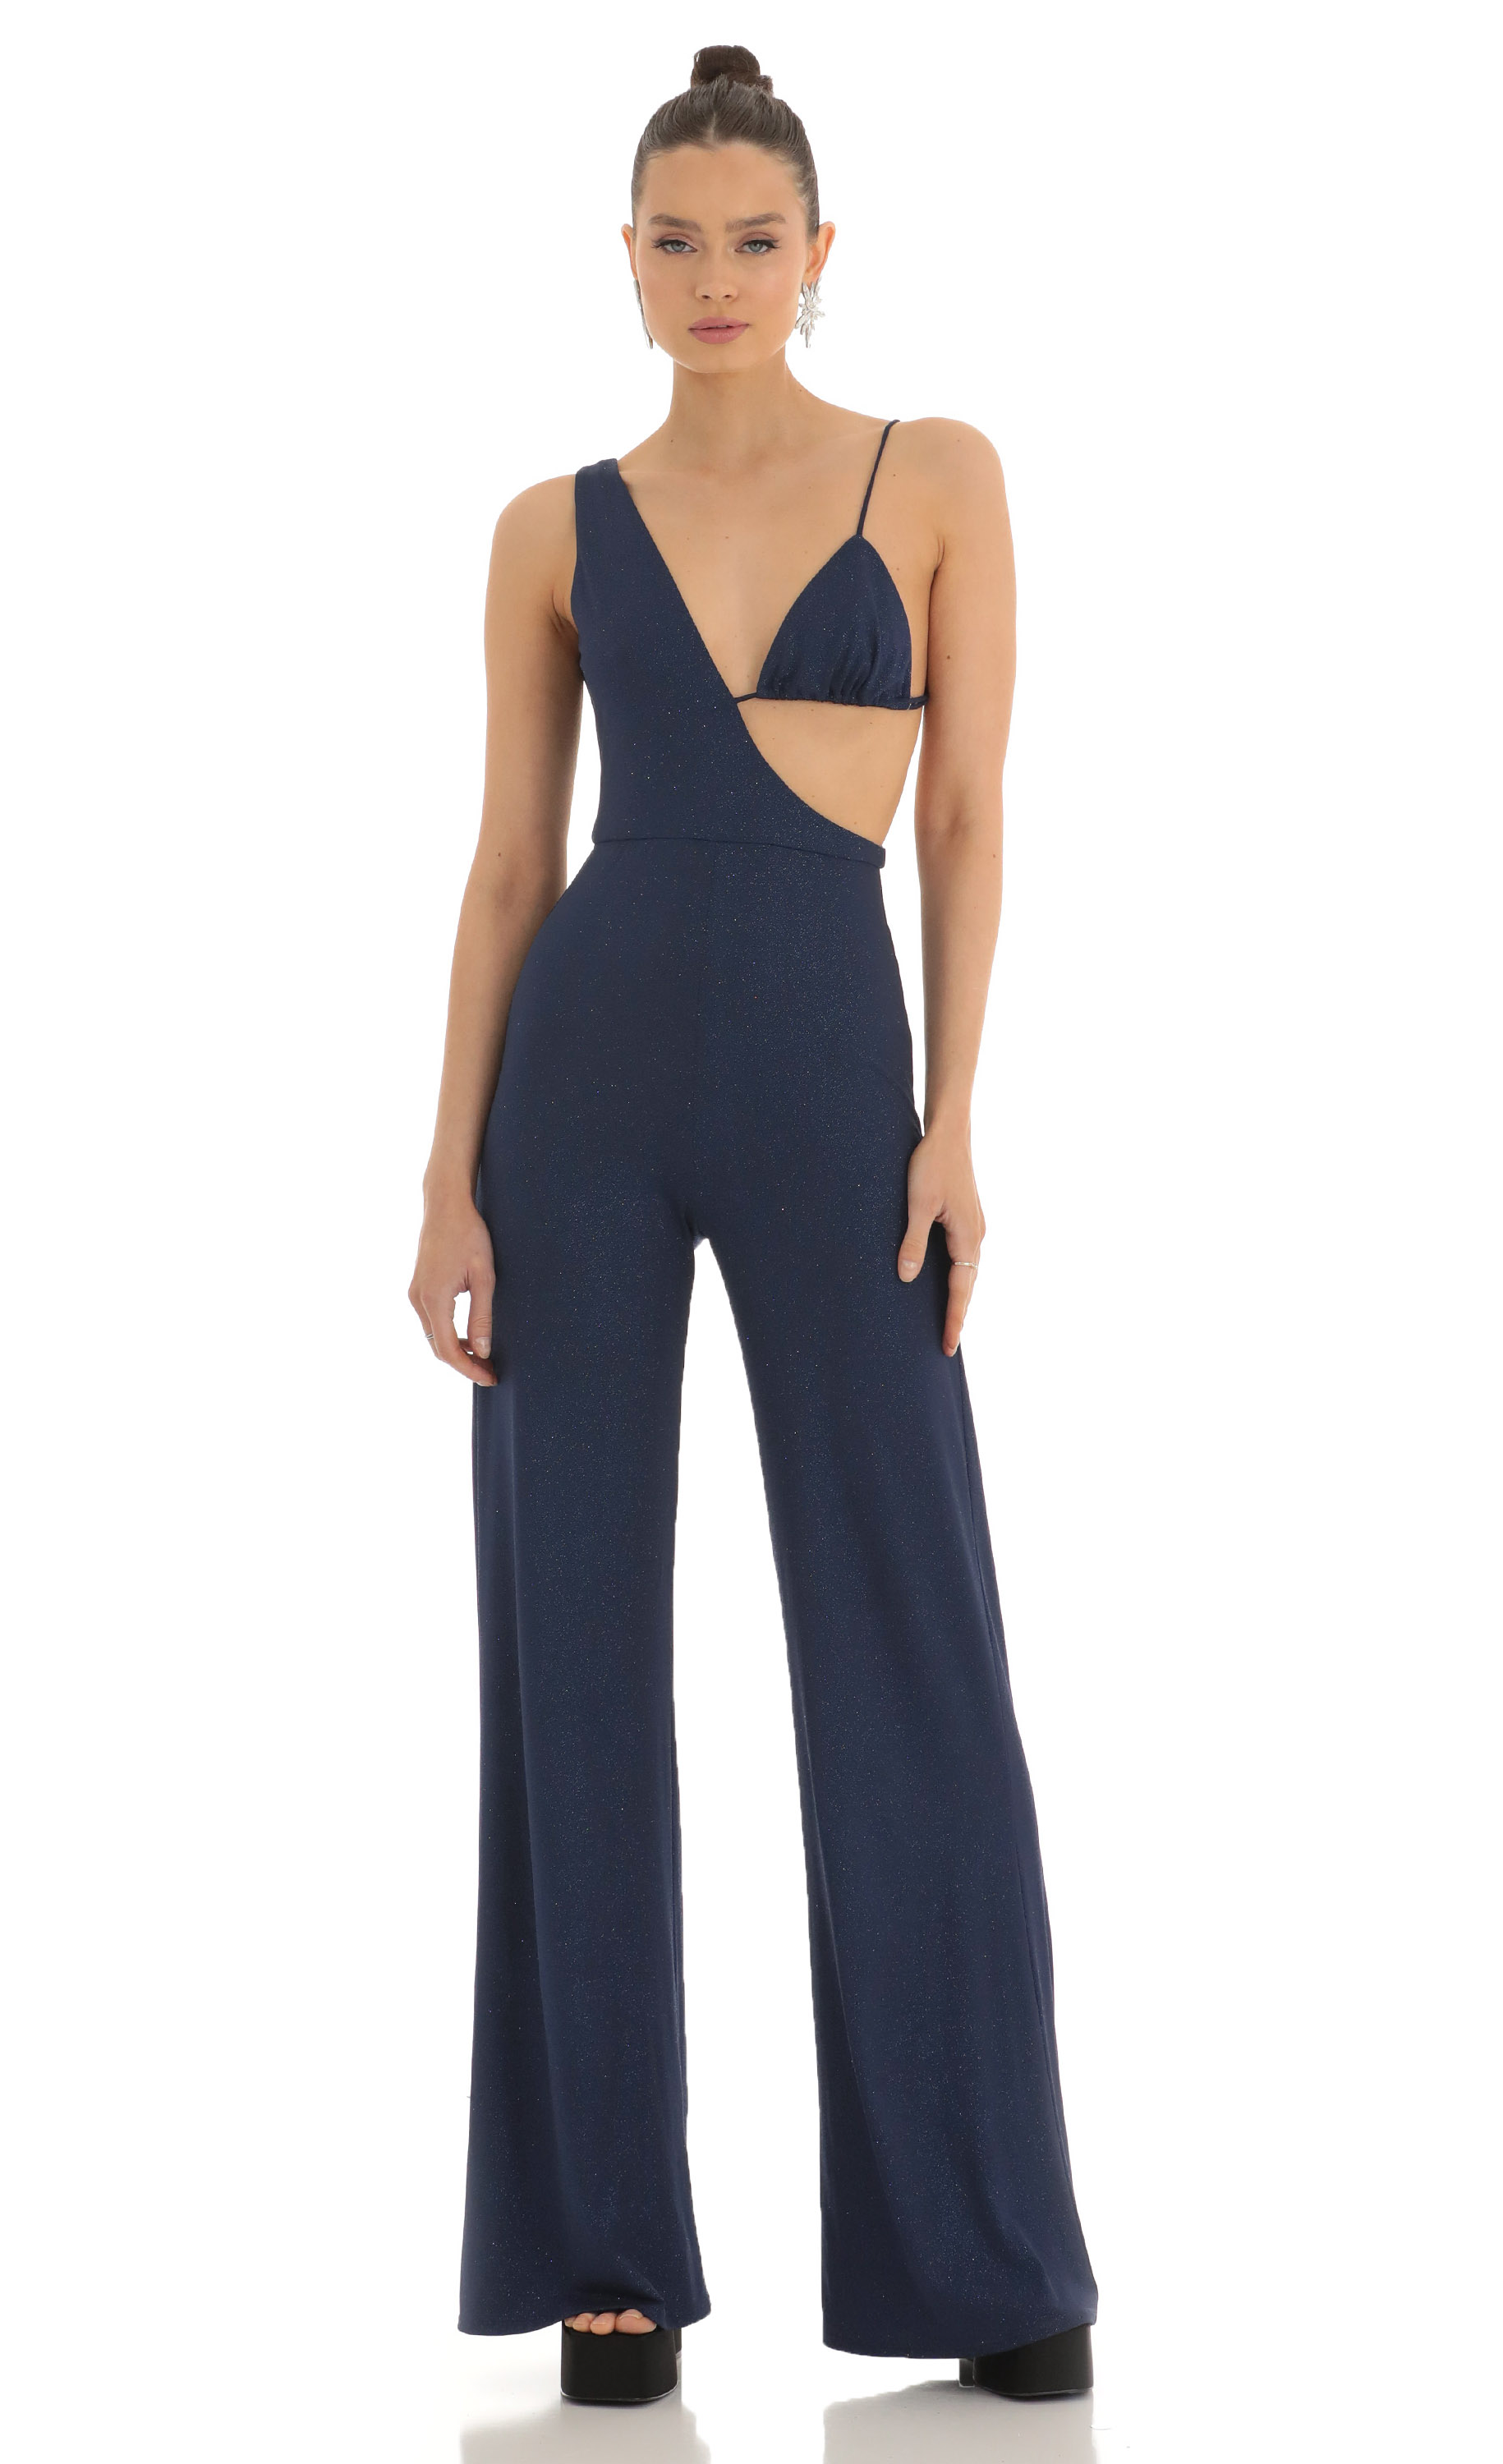 Late To The Party Glitter Bikini Jumpsuit in Navy